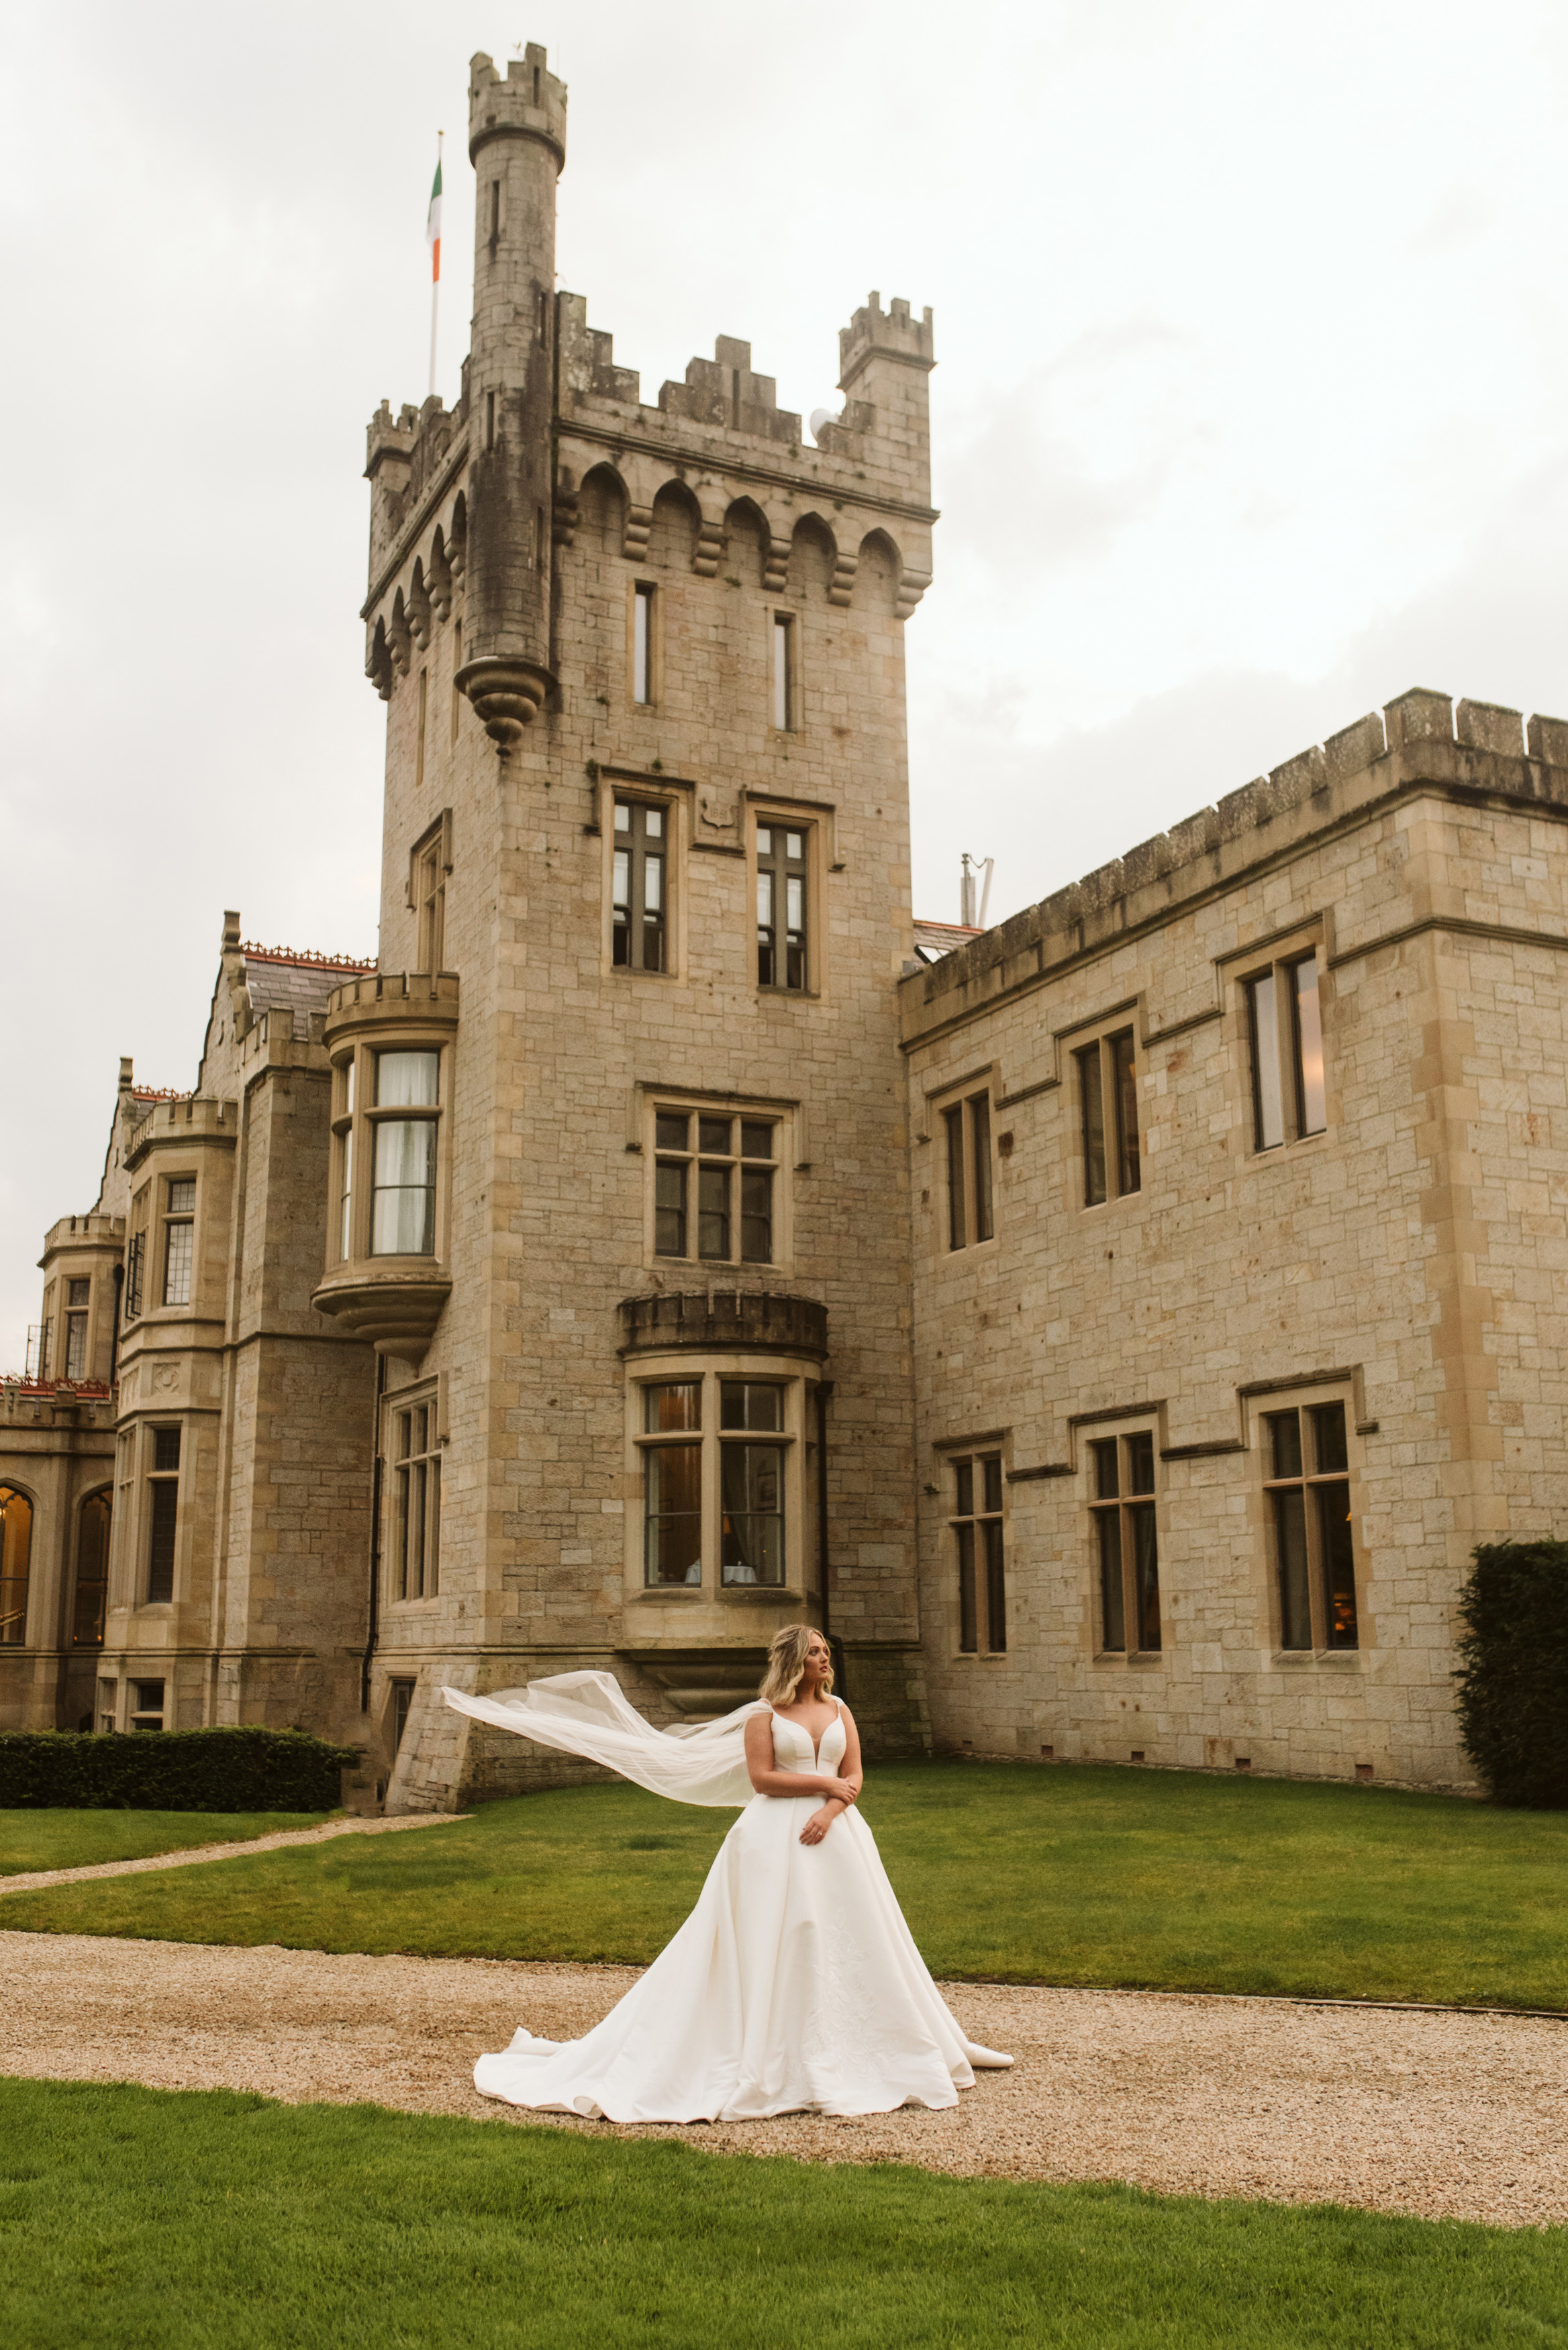 Bride in a mikado ballgown wedding dress with a tulle cape blowing in the wind at Lough Eske Castle in Ireland